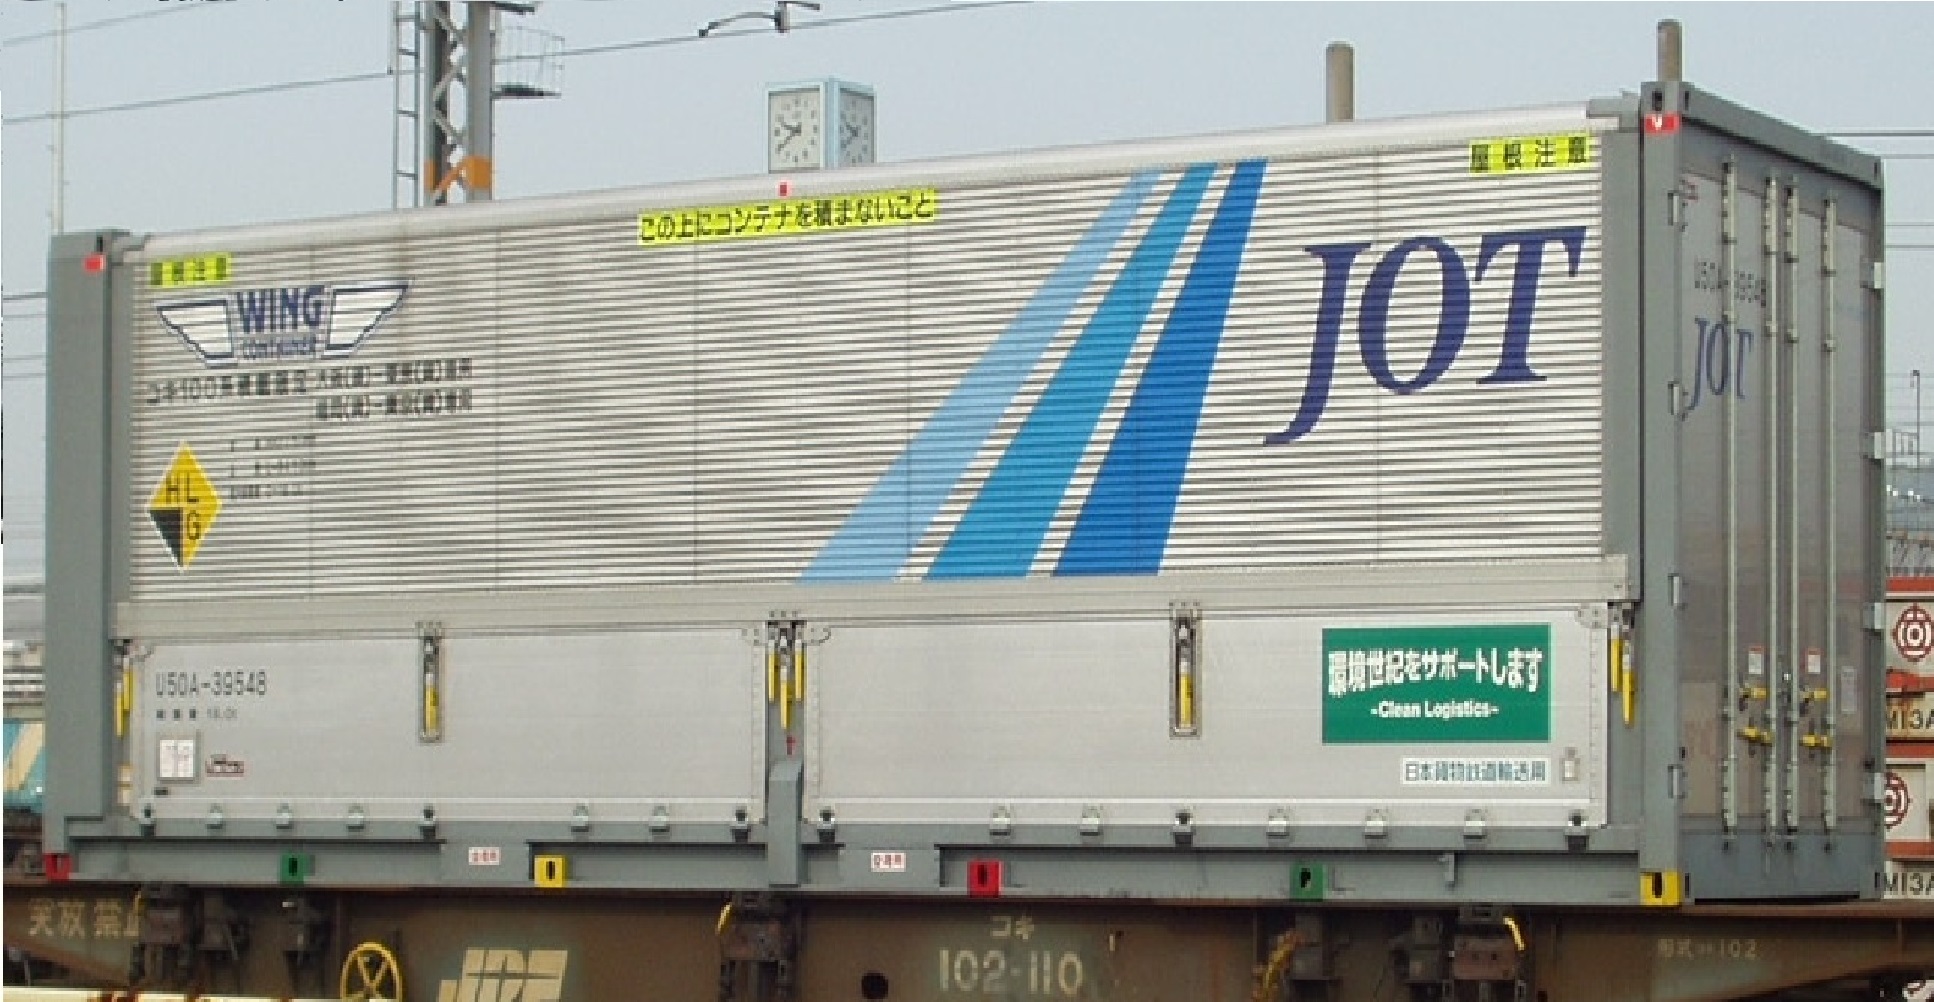 File:U50A-39548 【JOT日本石油輸送】Containers of Japan Rail.jpg - Wikimedia Commons